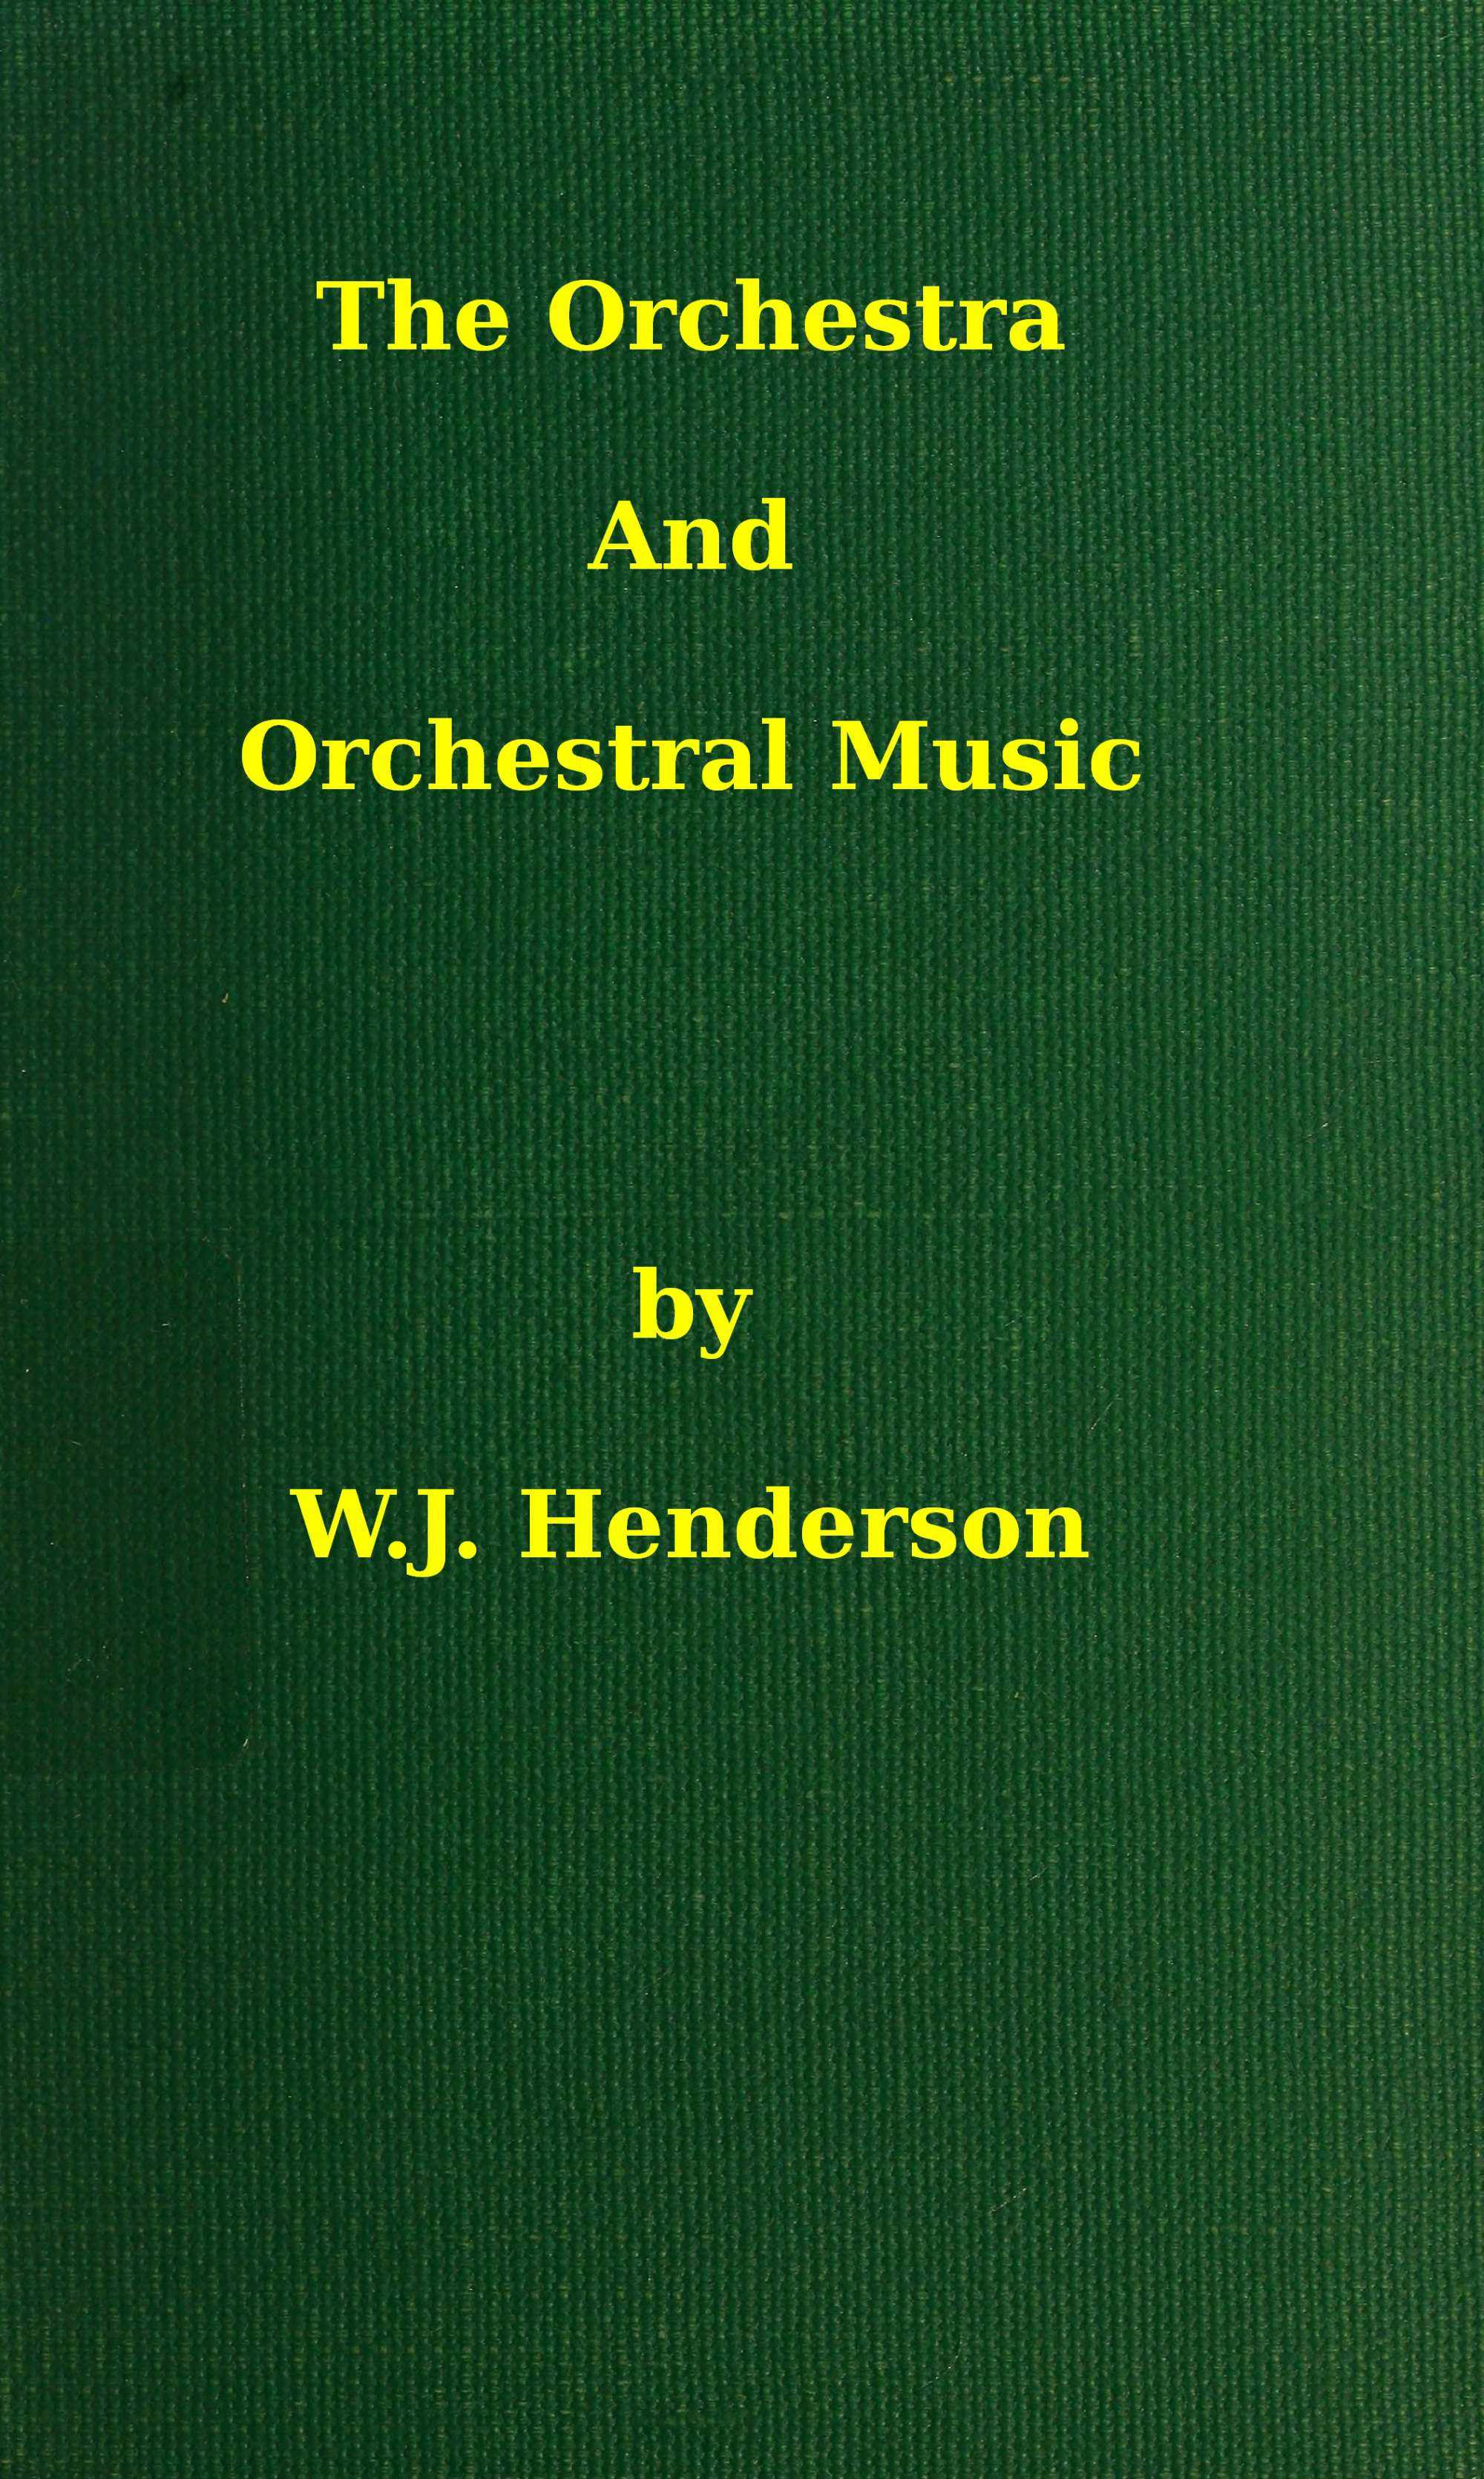 The orchestra and orchestral music